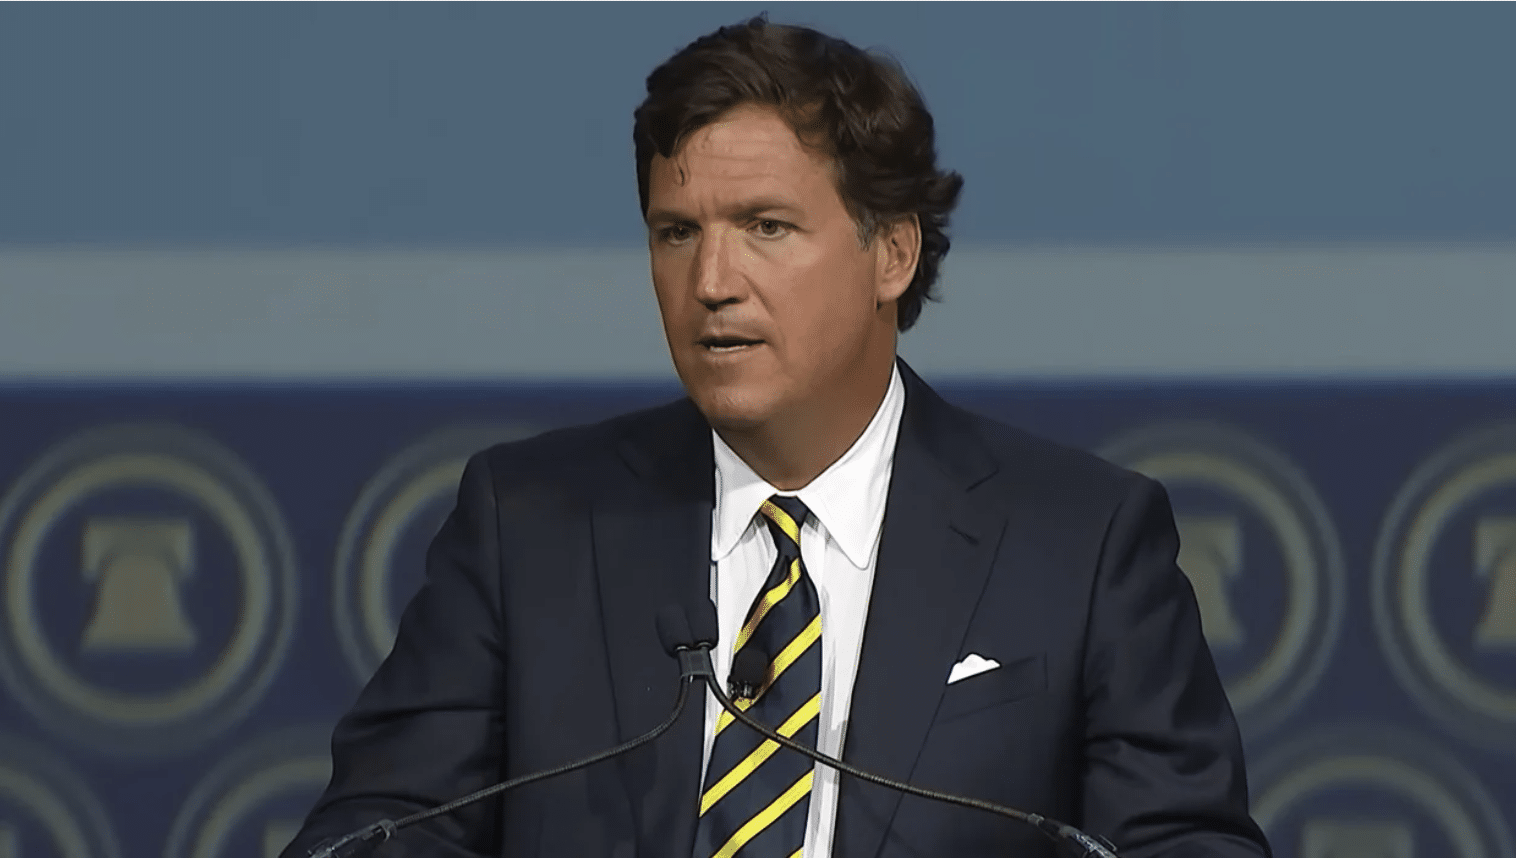 Insider claims Tucker Carlson booted from Fox over speech stressing the importance of prayer and the evil nature of the forces besetting America